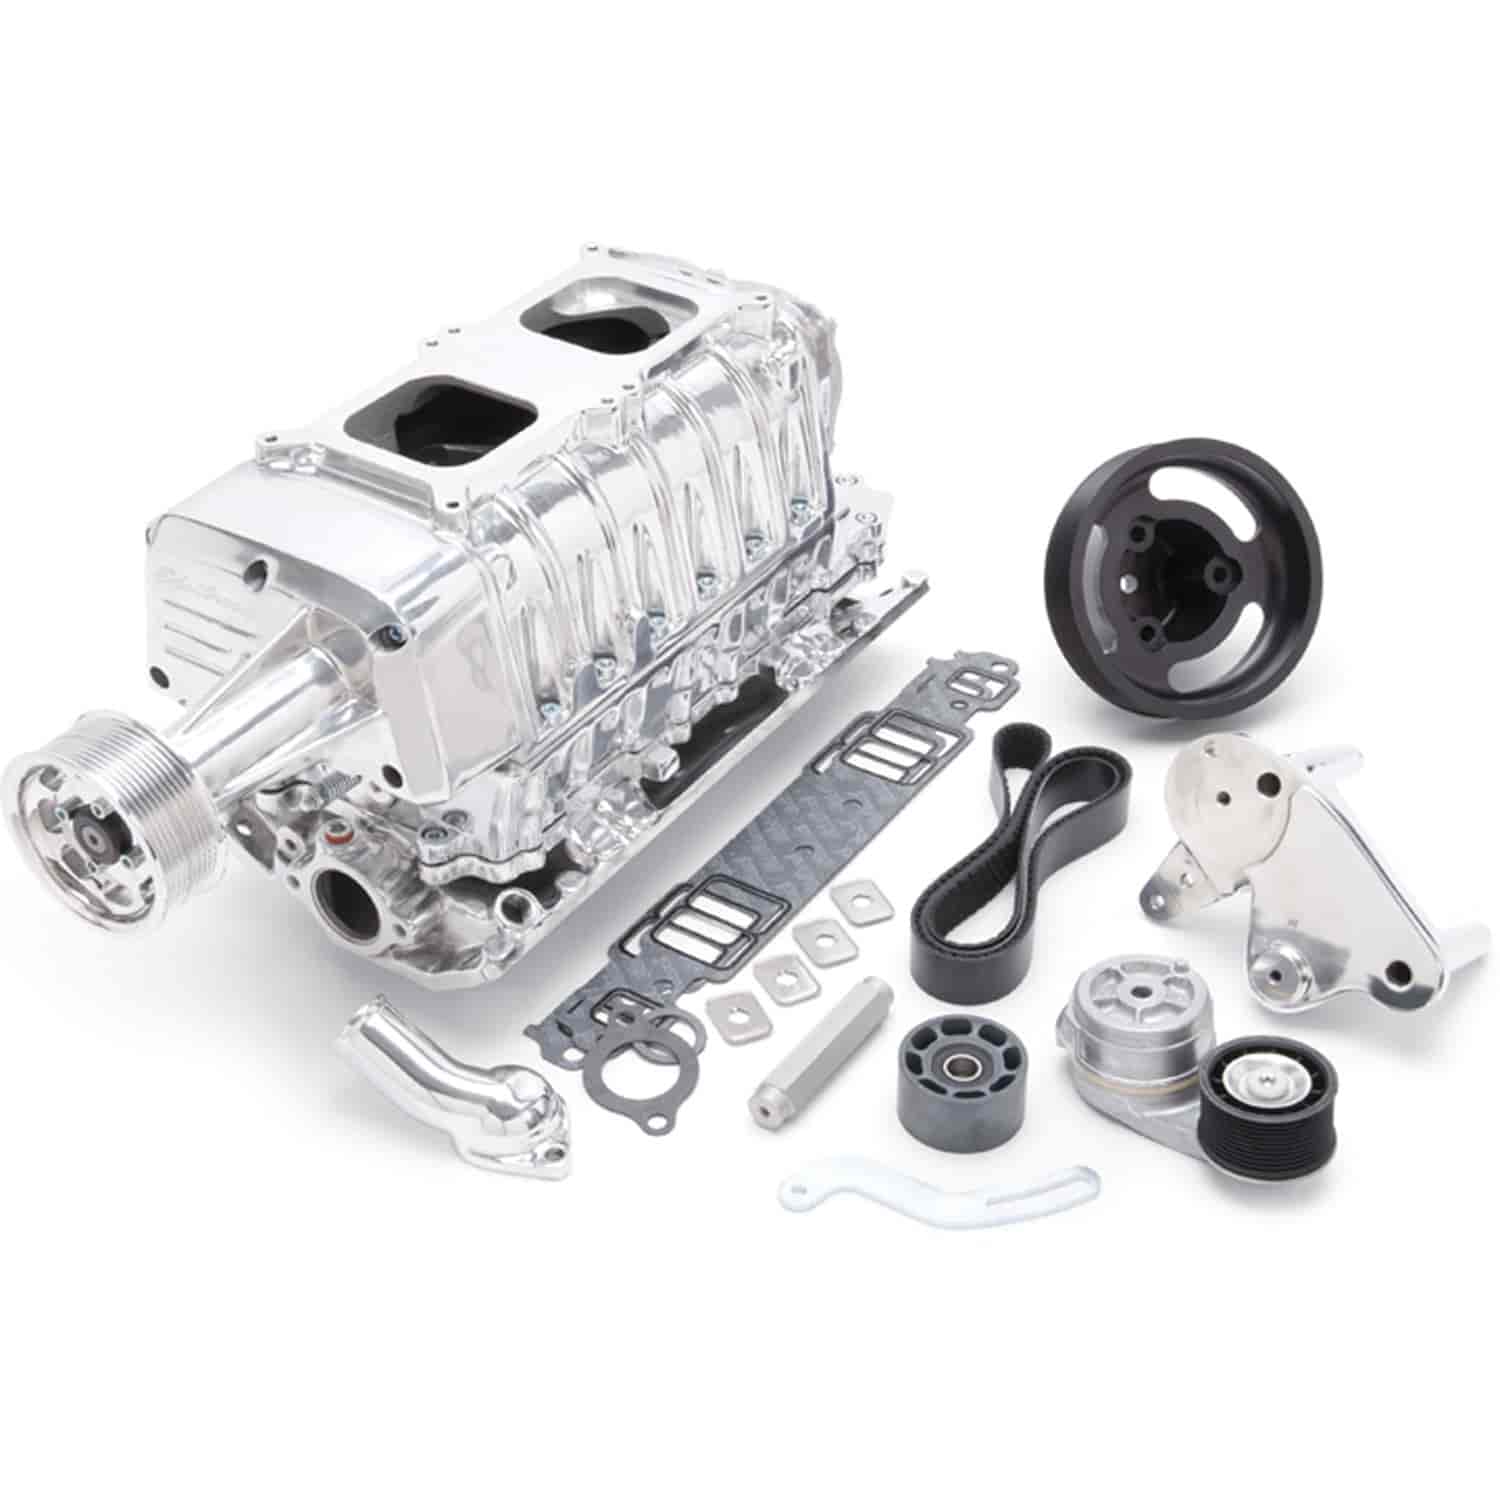 E-Force Enforcer RPM Dual Quad Polished Supercharger Kit for 1955-1986 Small Block Chevy